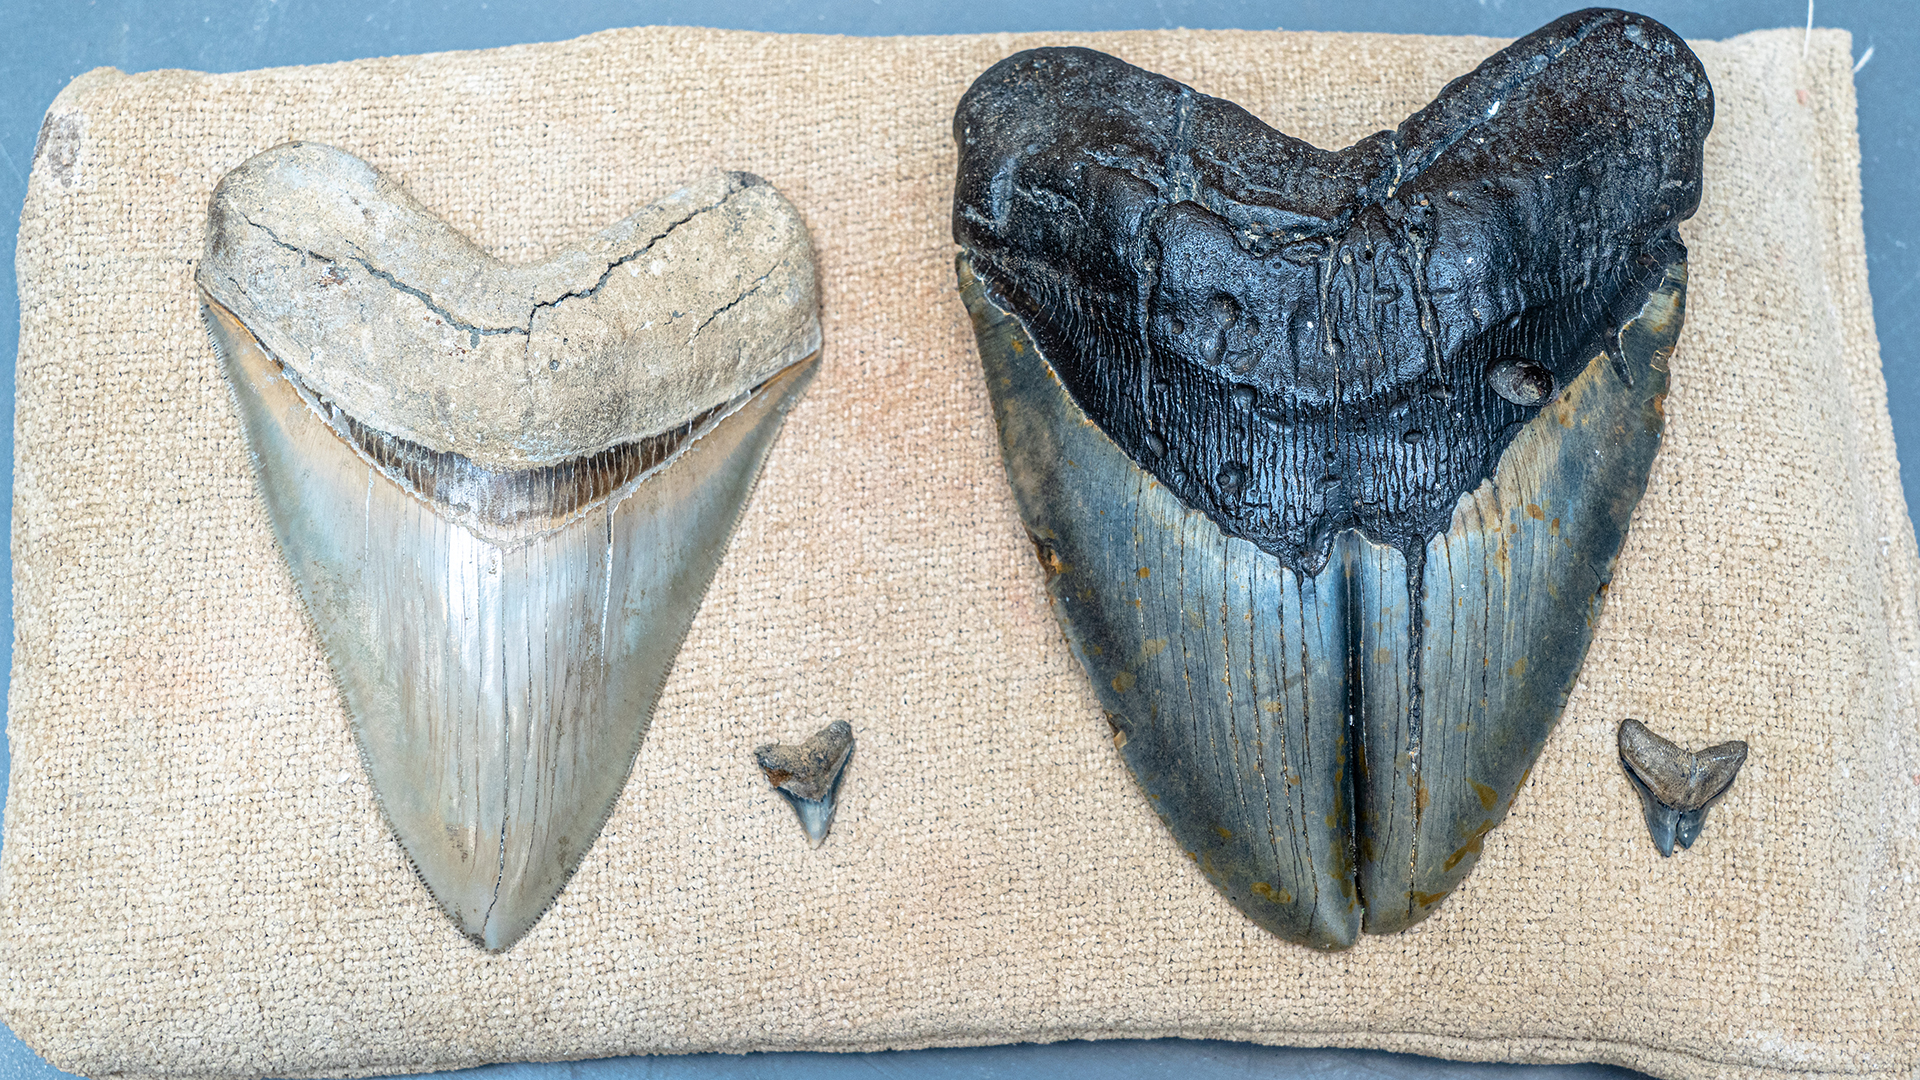 Normal teeth next to deformed teeth from two shark species: extinct Otodus megalodon and Carcharhinus leucas, which is still around today.